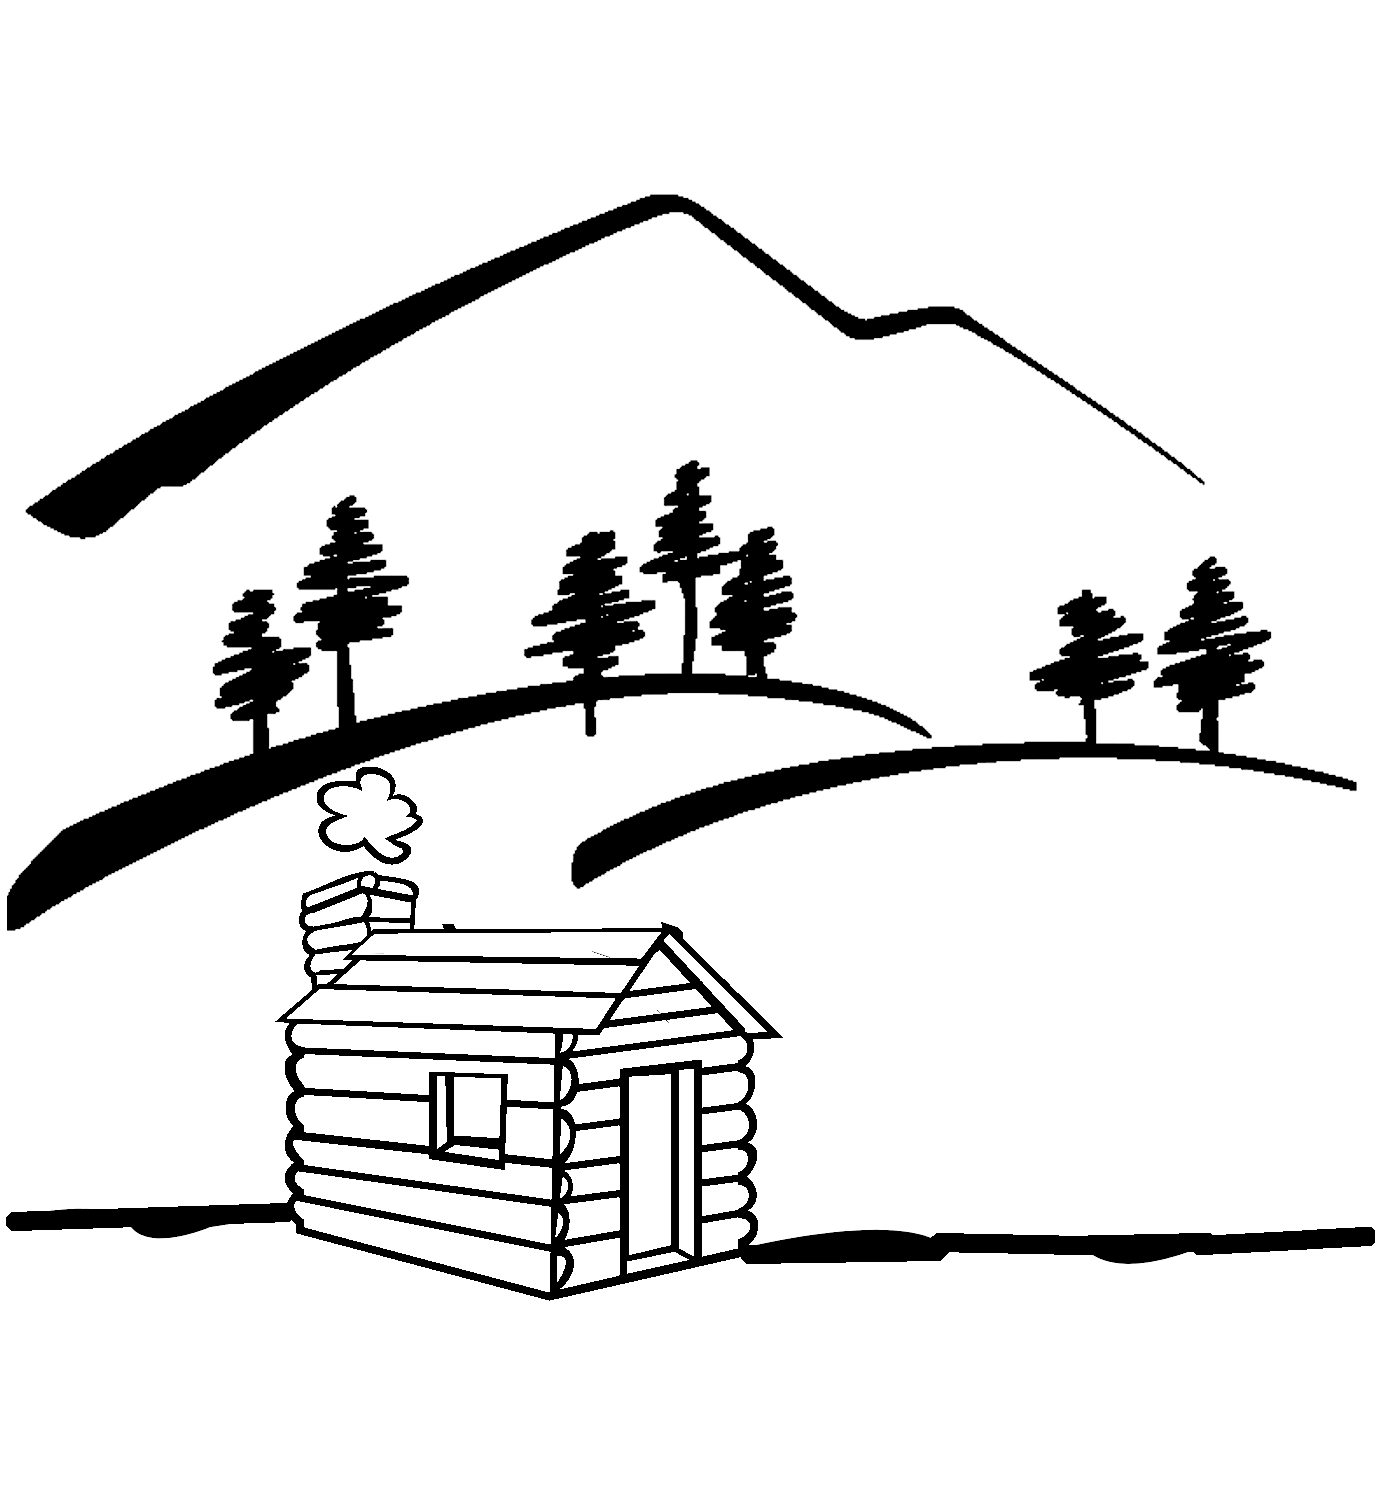 Log cabin clip art viewing free clipart images